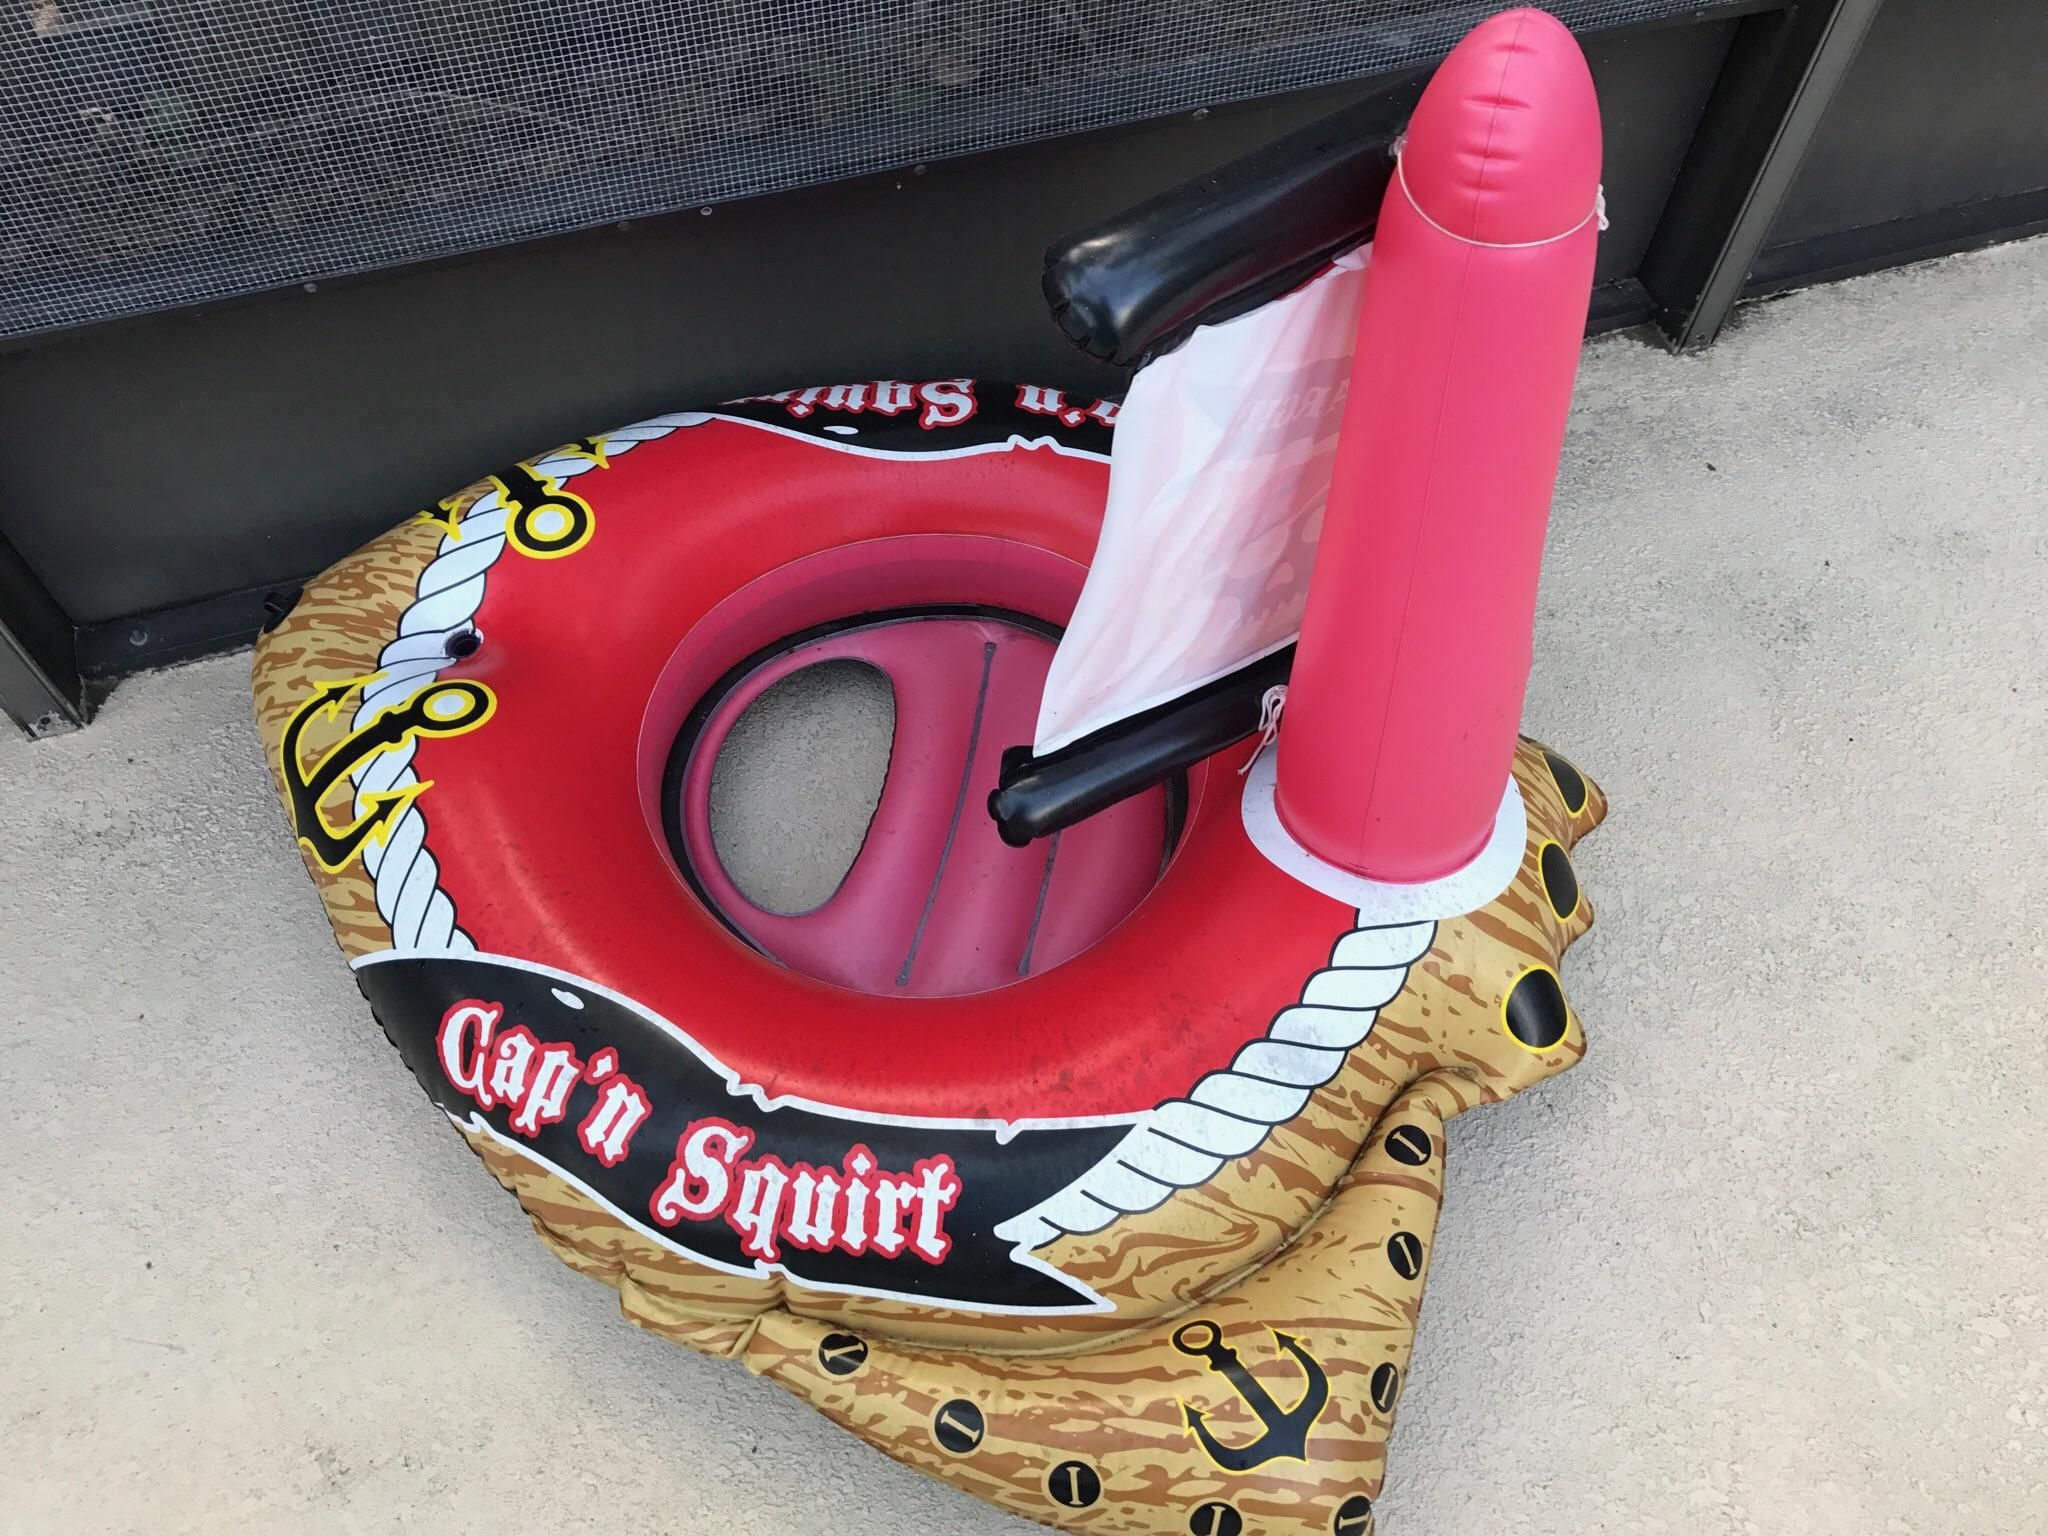 Uh, kids, I'd prefer you not ride on Cap'n Squirt